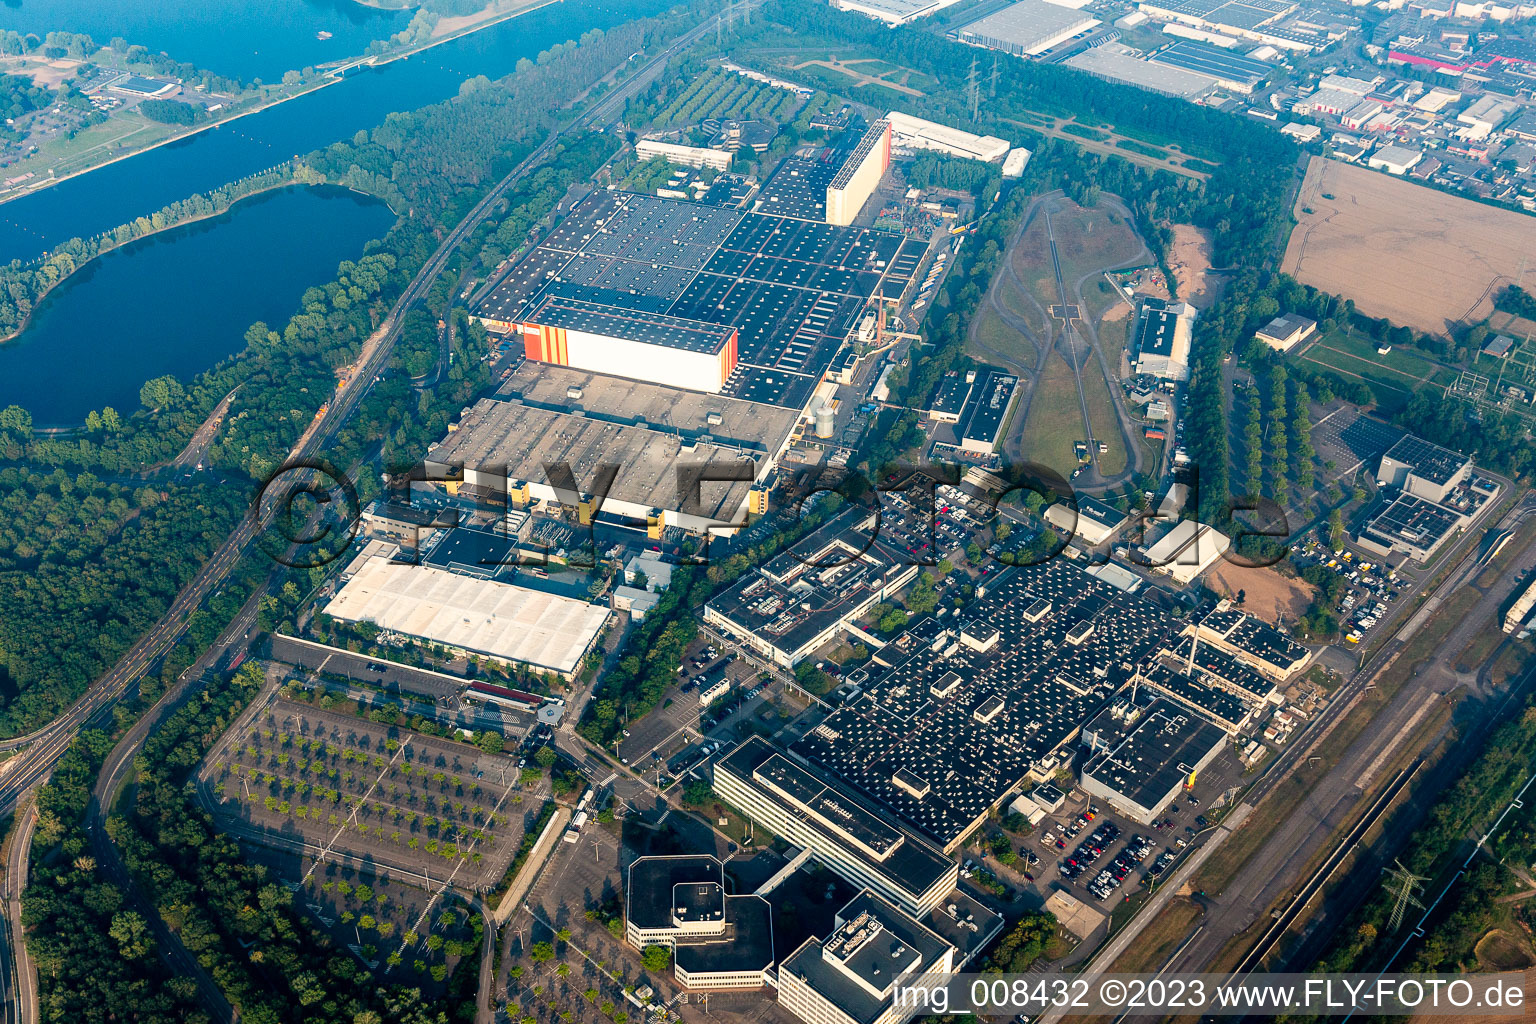 Factory premises of Ford-Werke GmbH in the district Niehl in Cologne in the state of North Rhine-Westphalia, Germany